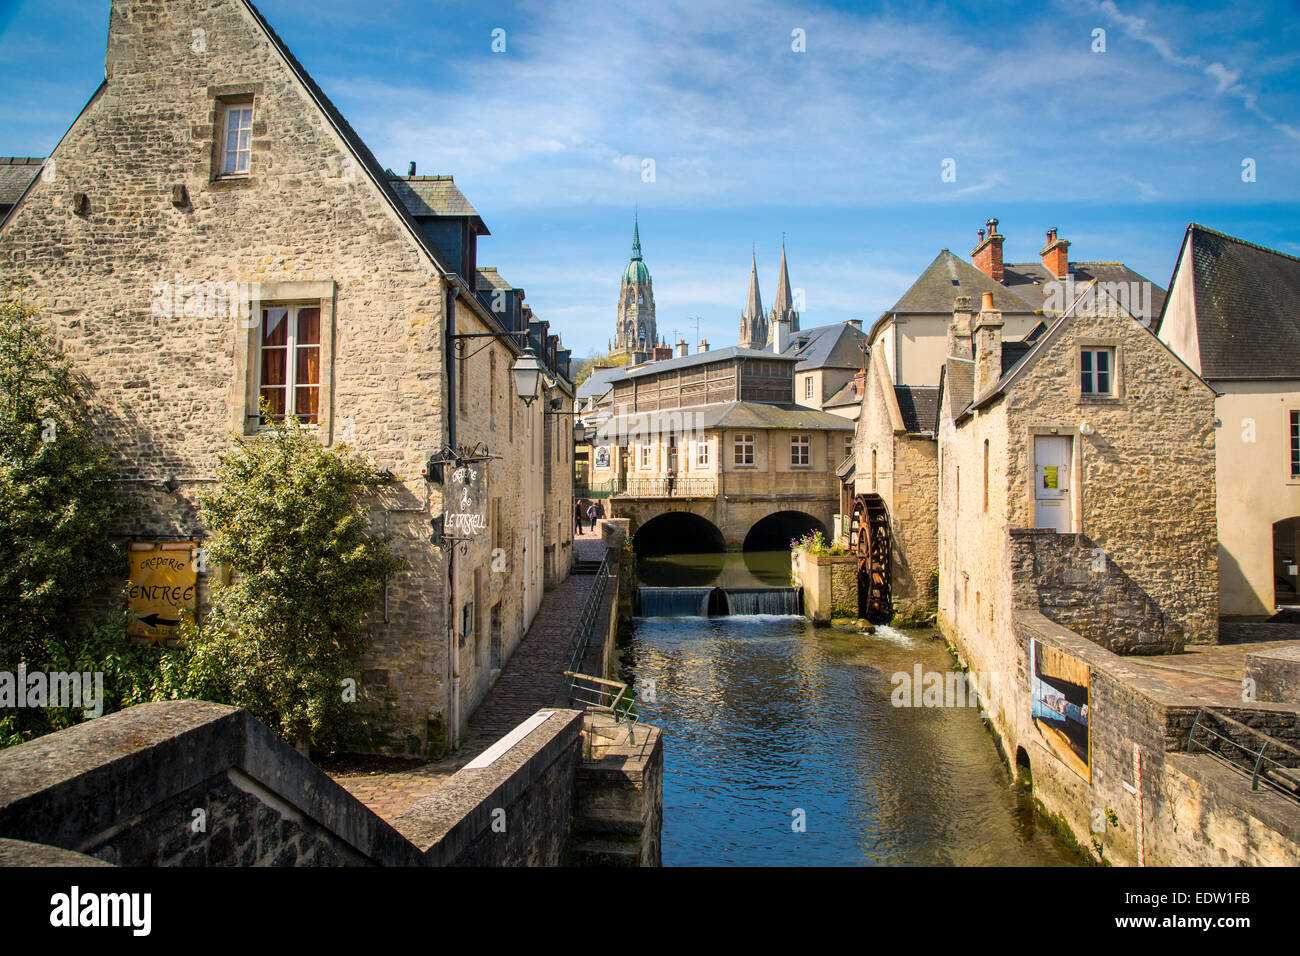 Mill along River Weir and medieval town of Bayeux, Normandy France Stock Photo